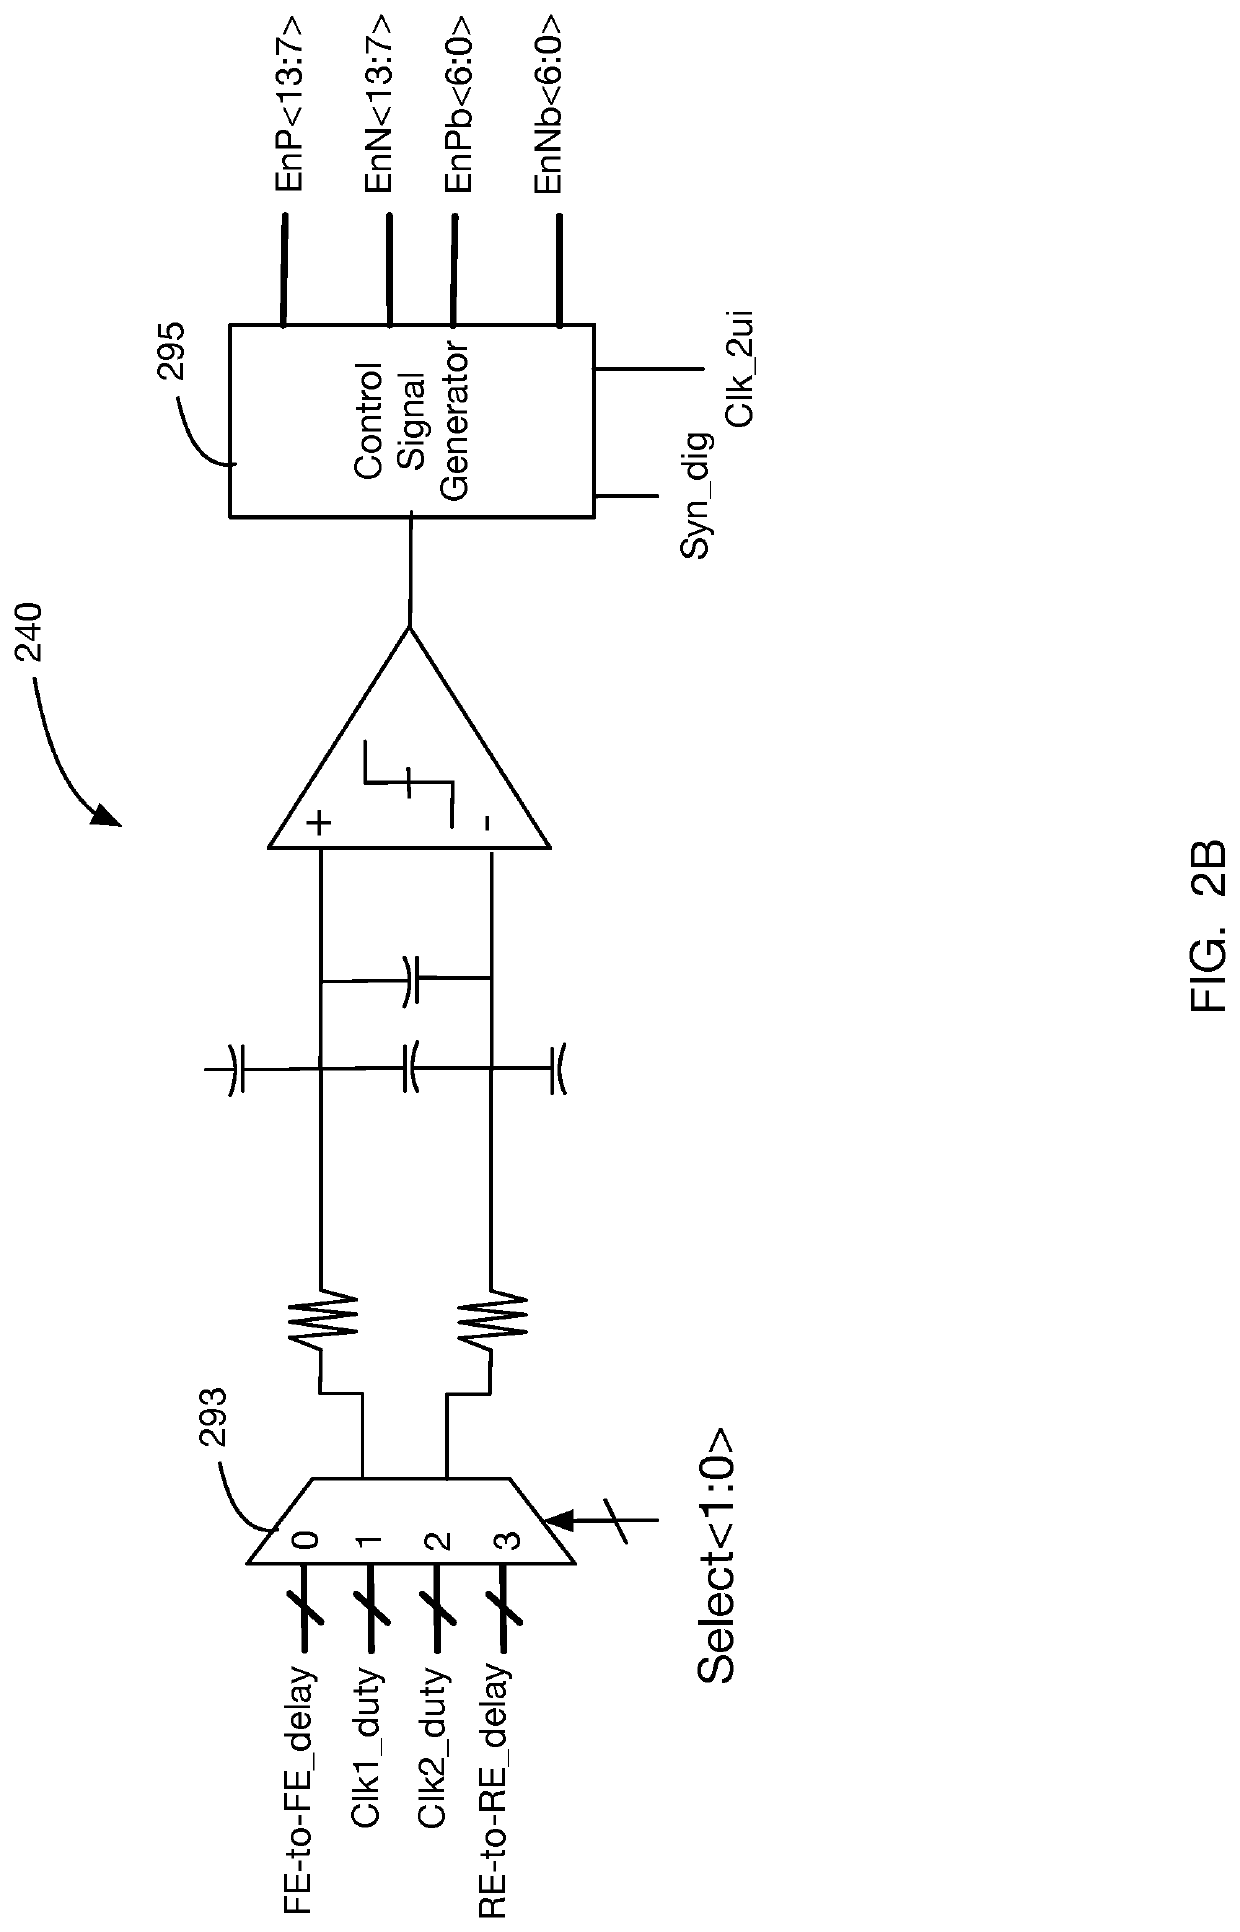 Measurement and correction of multiphase clock duty cycle and skew